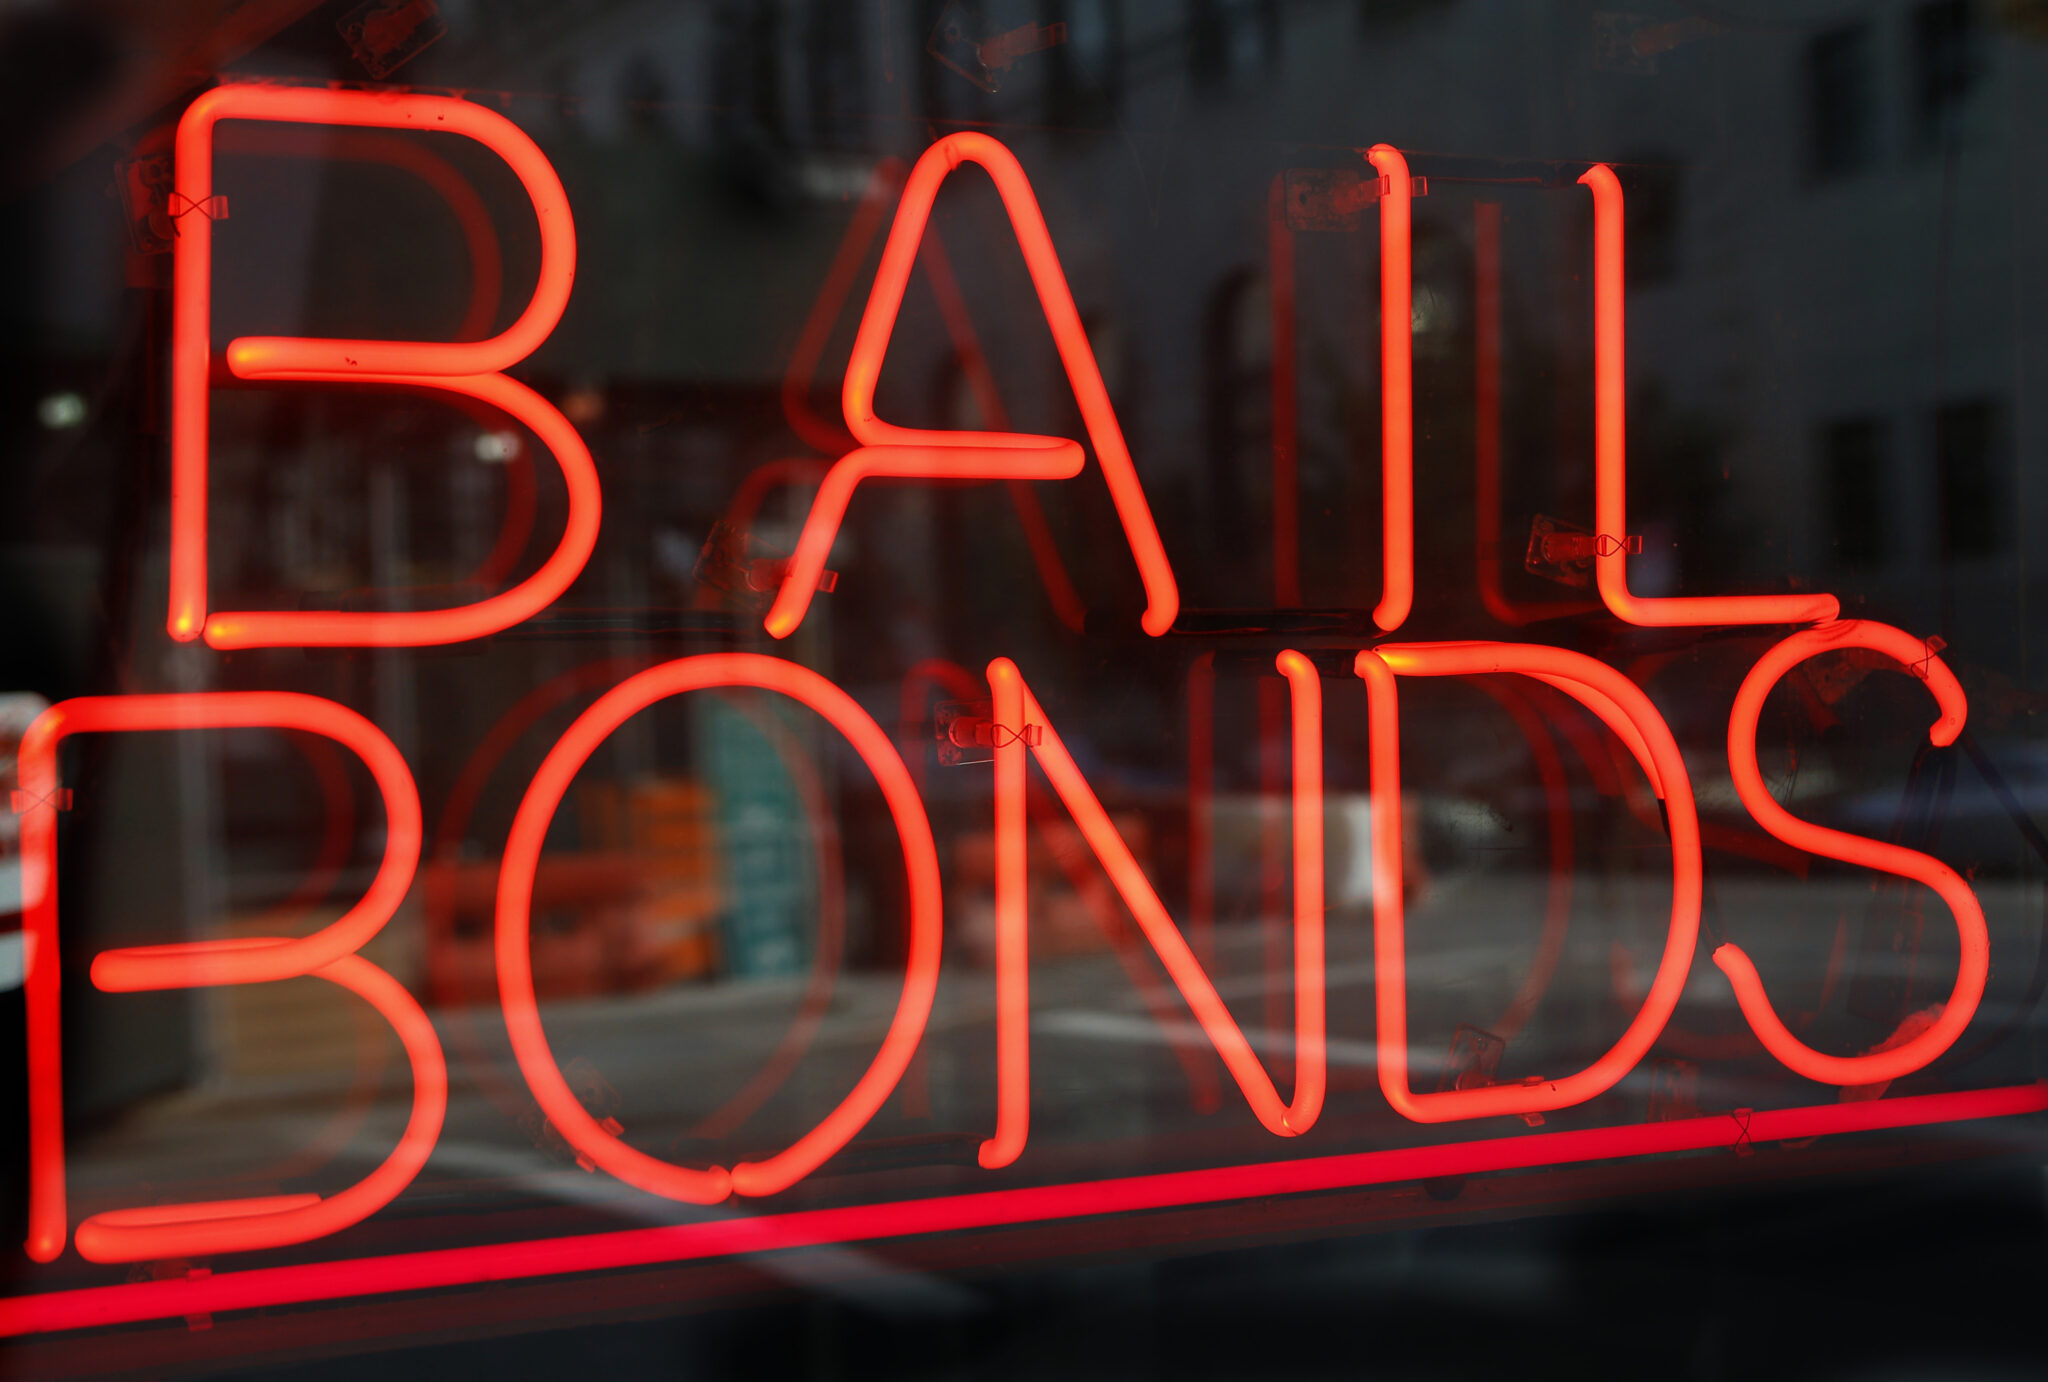 FILE - In this Tuesday, July 7, 2015, file photo, a sign advertising a bail bonds business is displayed near Brooklyn's jail and courthouse complex in New York. A national effort is launching that aims to help low-income defendants get out of jail by bailing them out as their criminal cases progress through the courts. (AP Photo/Kathy Willens, File)